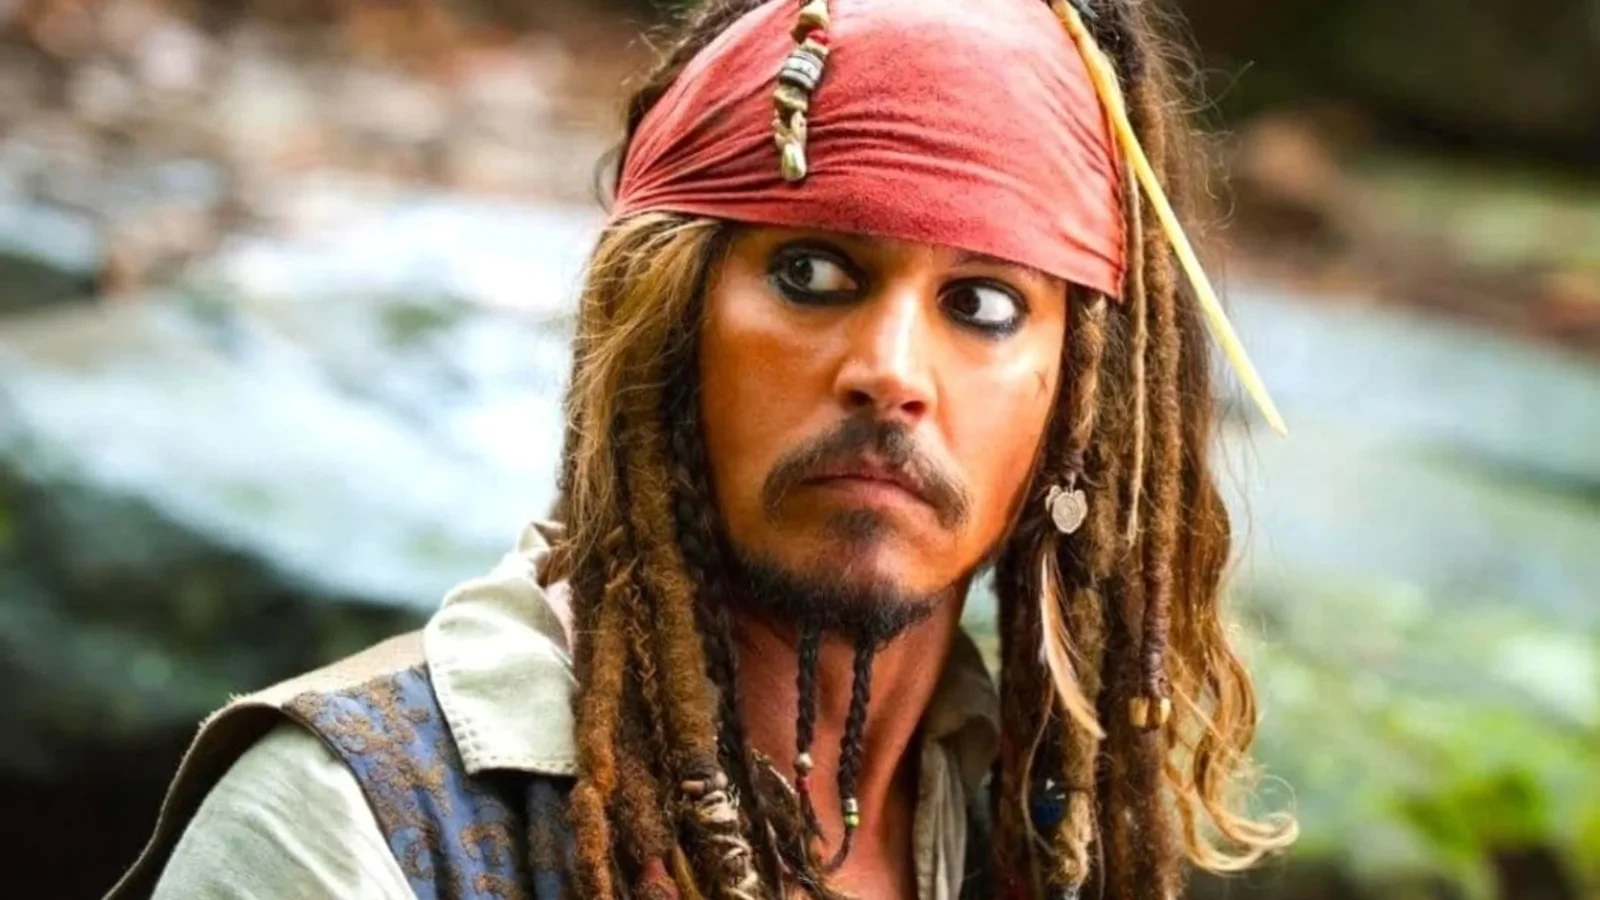 Johnny Depp as Jack Sparrow in the Pirates of the Caribbean franchise